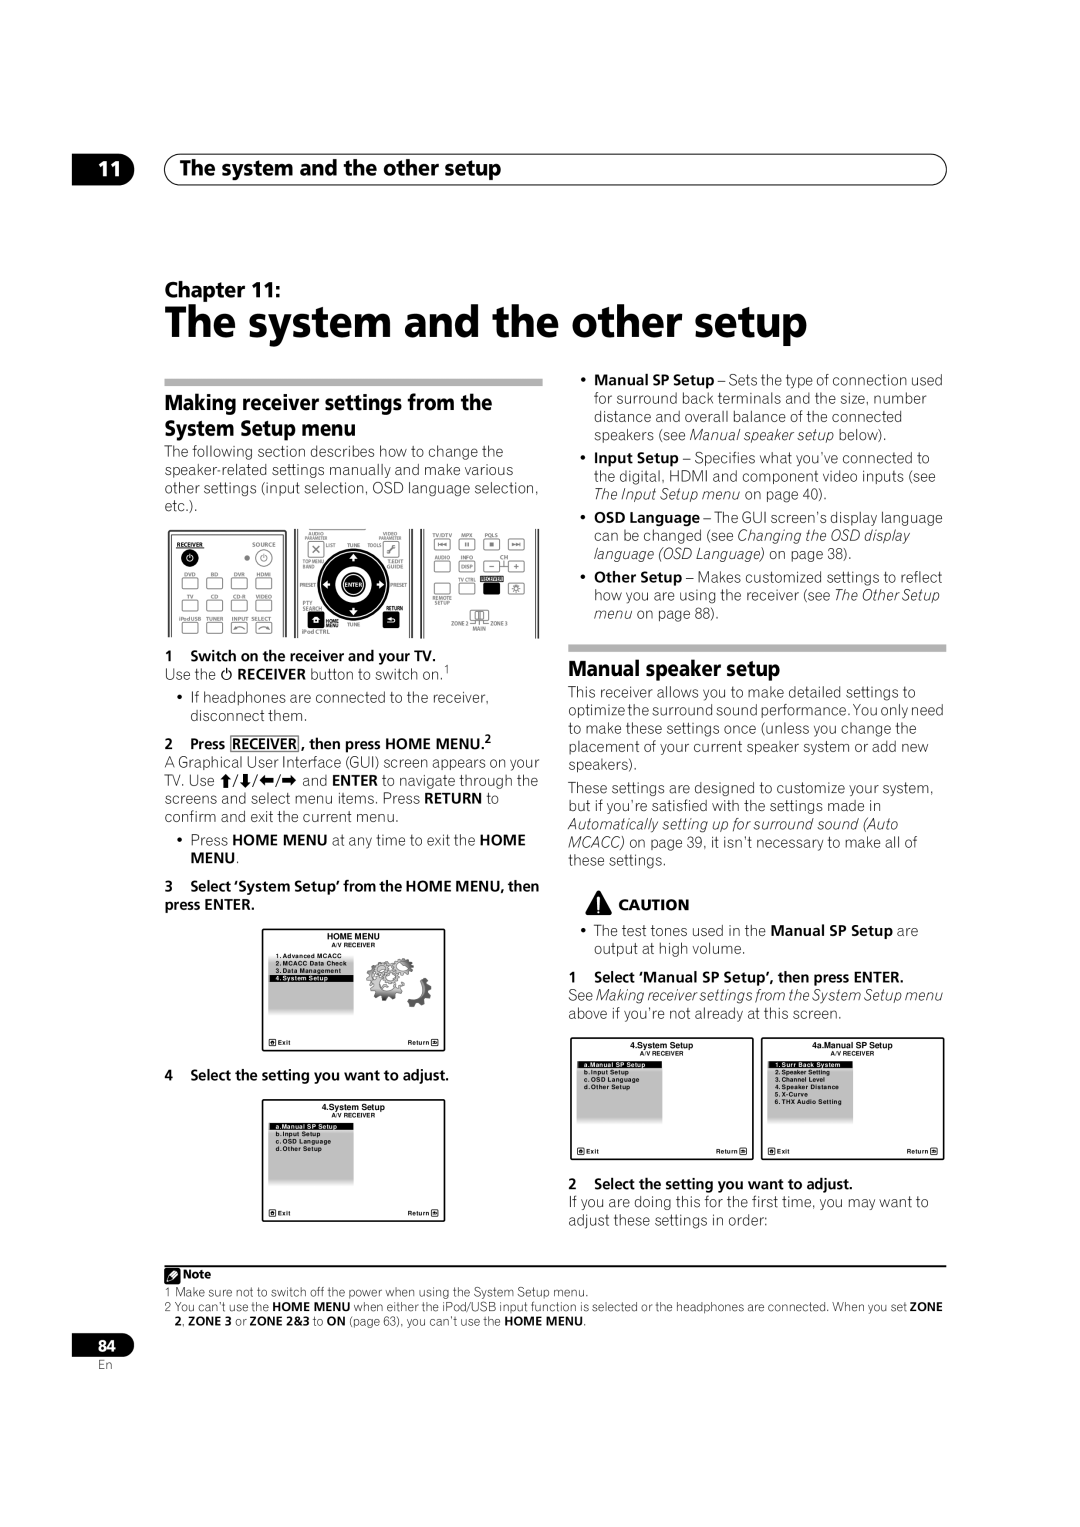 Pioneer VSX-LX52 manual 11The system and the other setup Chapter, Manual speaker setup 